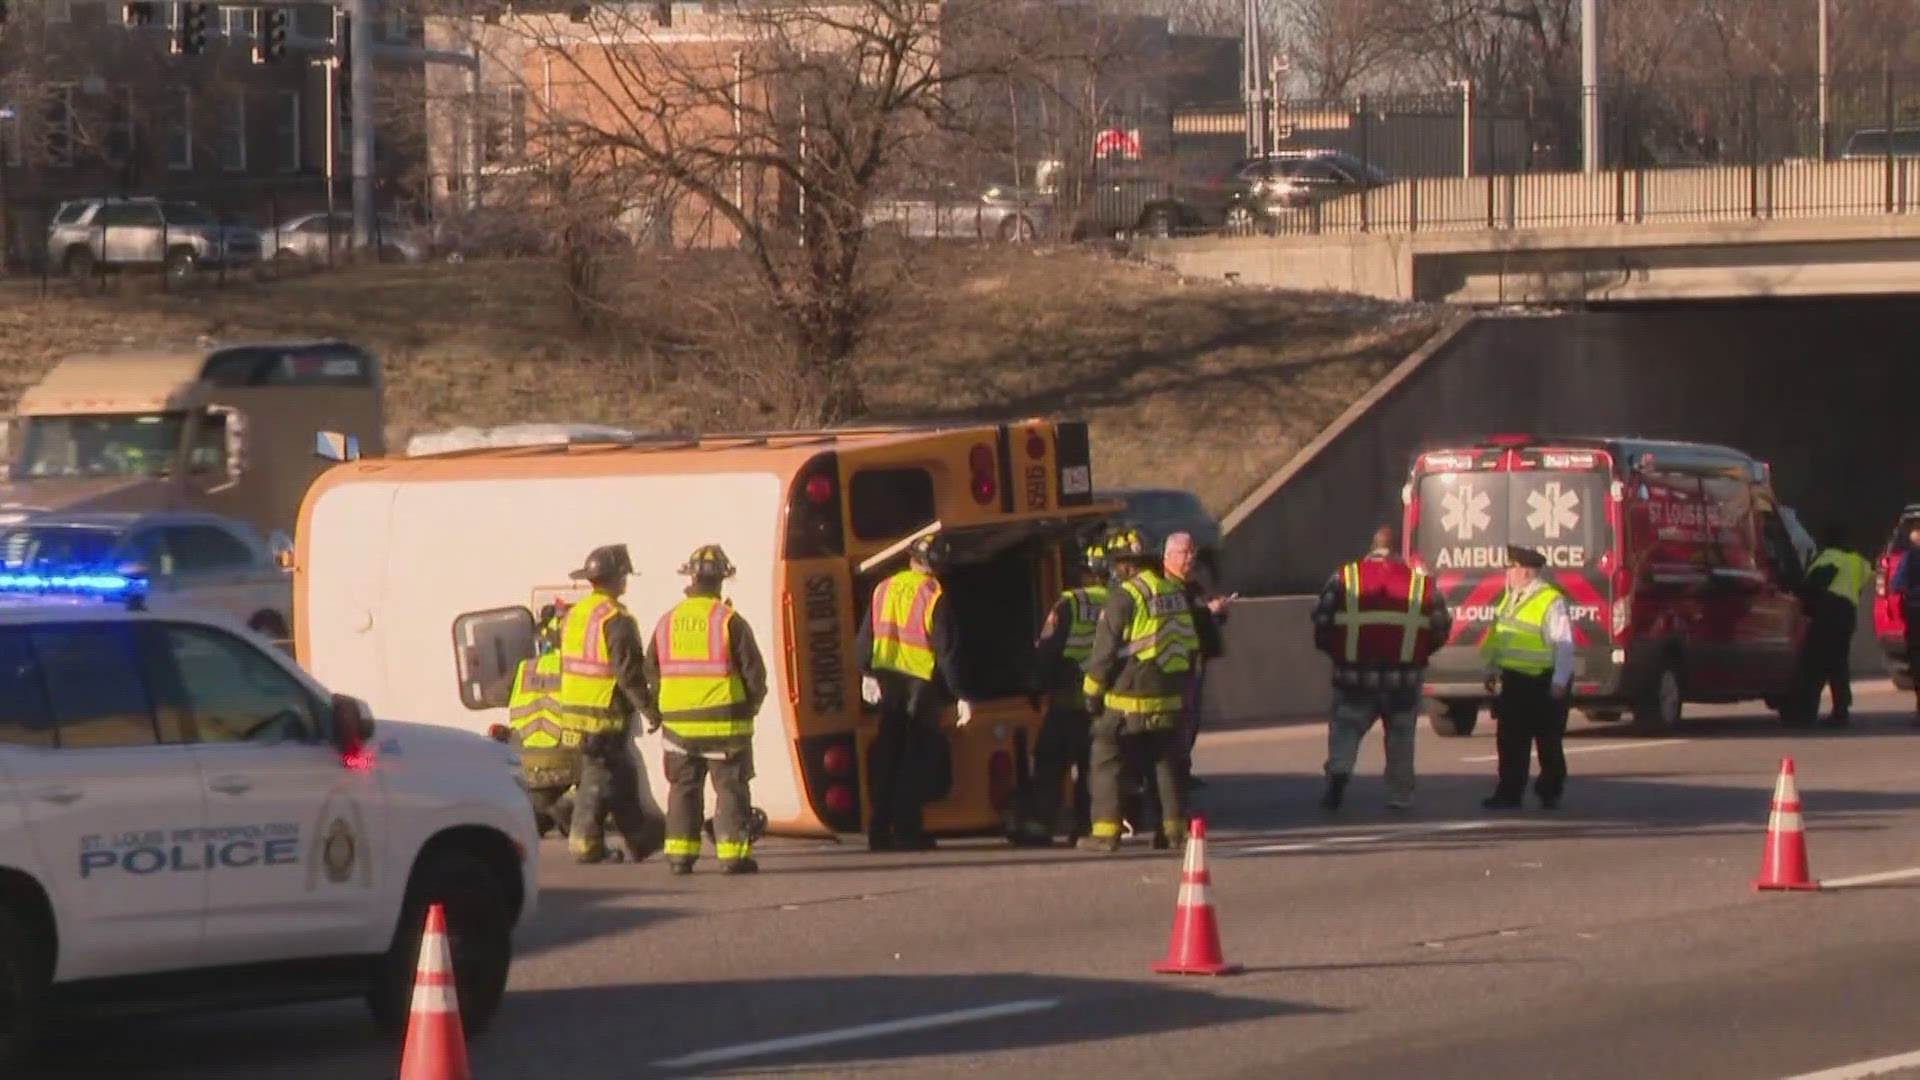 A woman is in custody after a hit-and-run involving a school bus on Interstate 44 Wednesday morning, the St. Louis Metropolitan Police Department said.